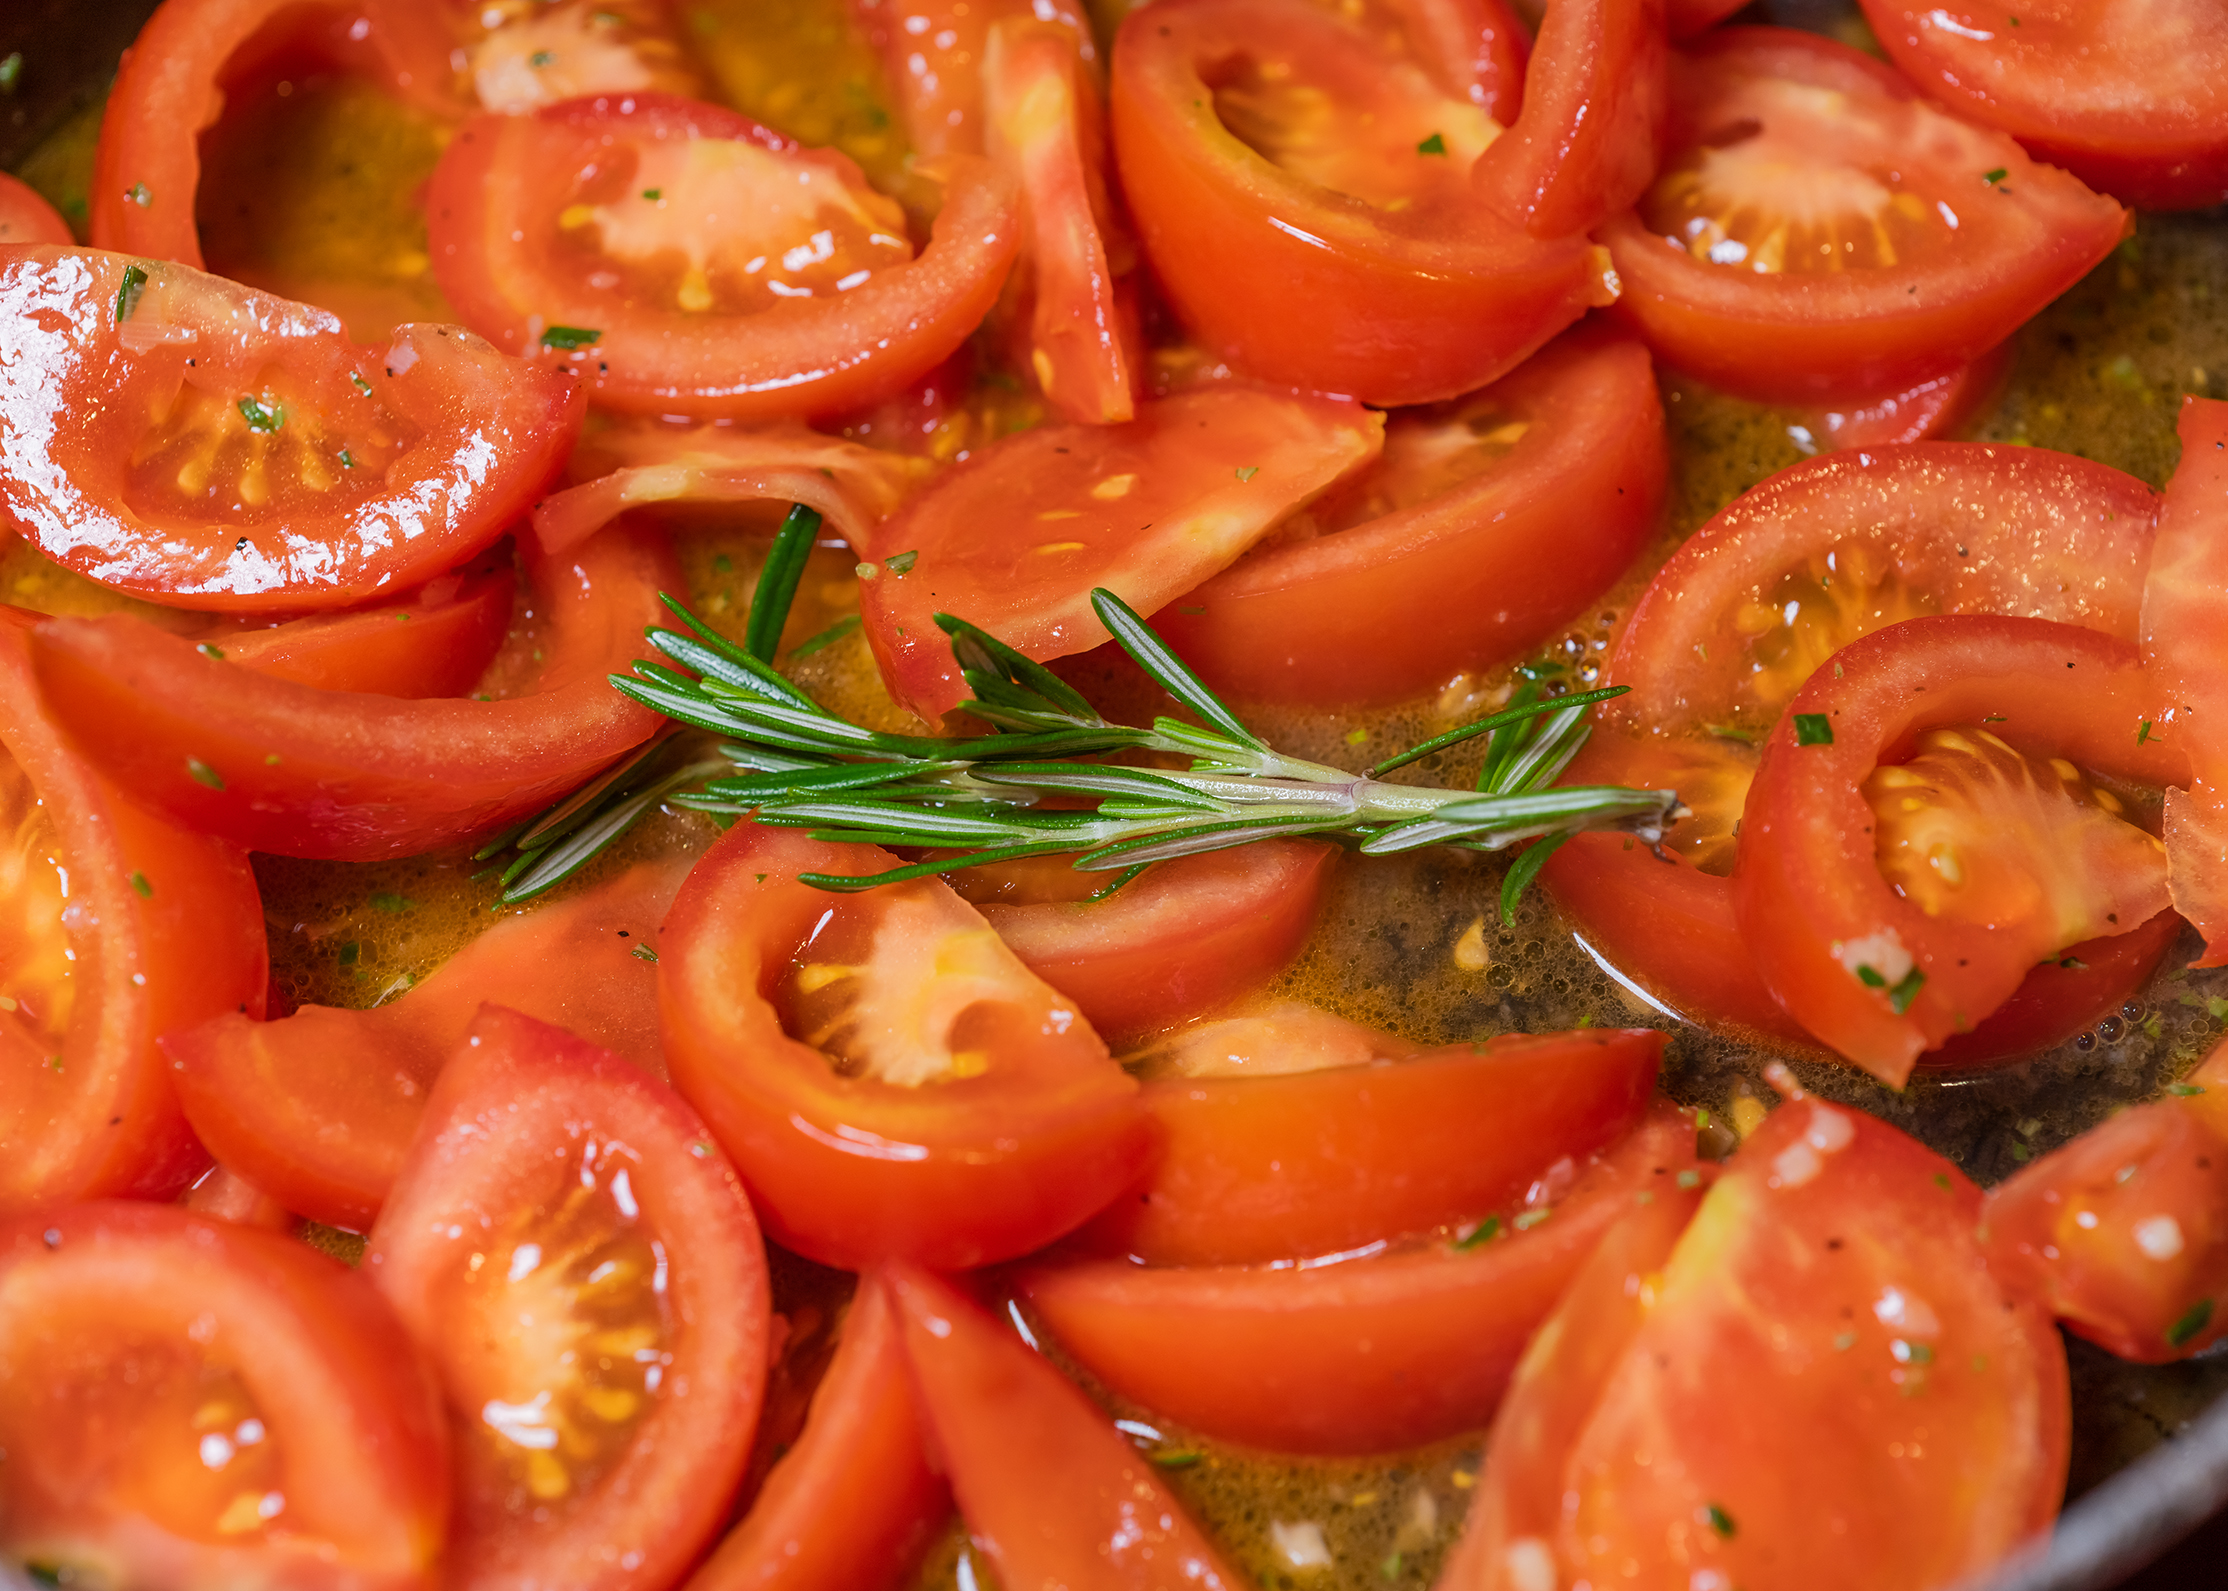 Chopped tomatoes with rosemary sprig